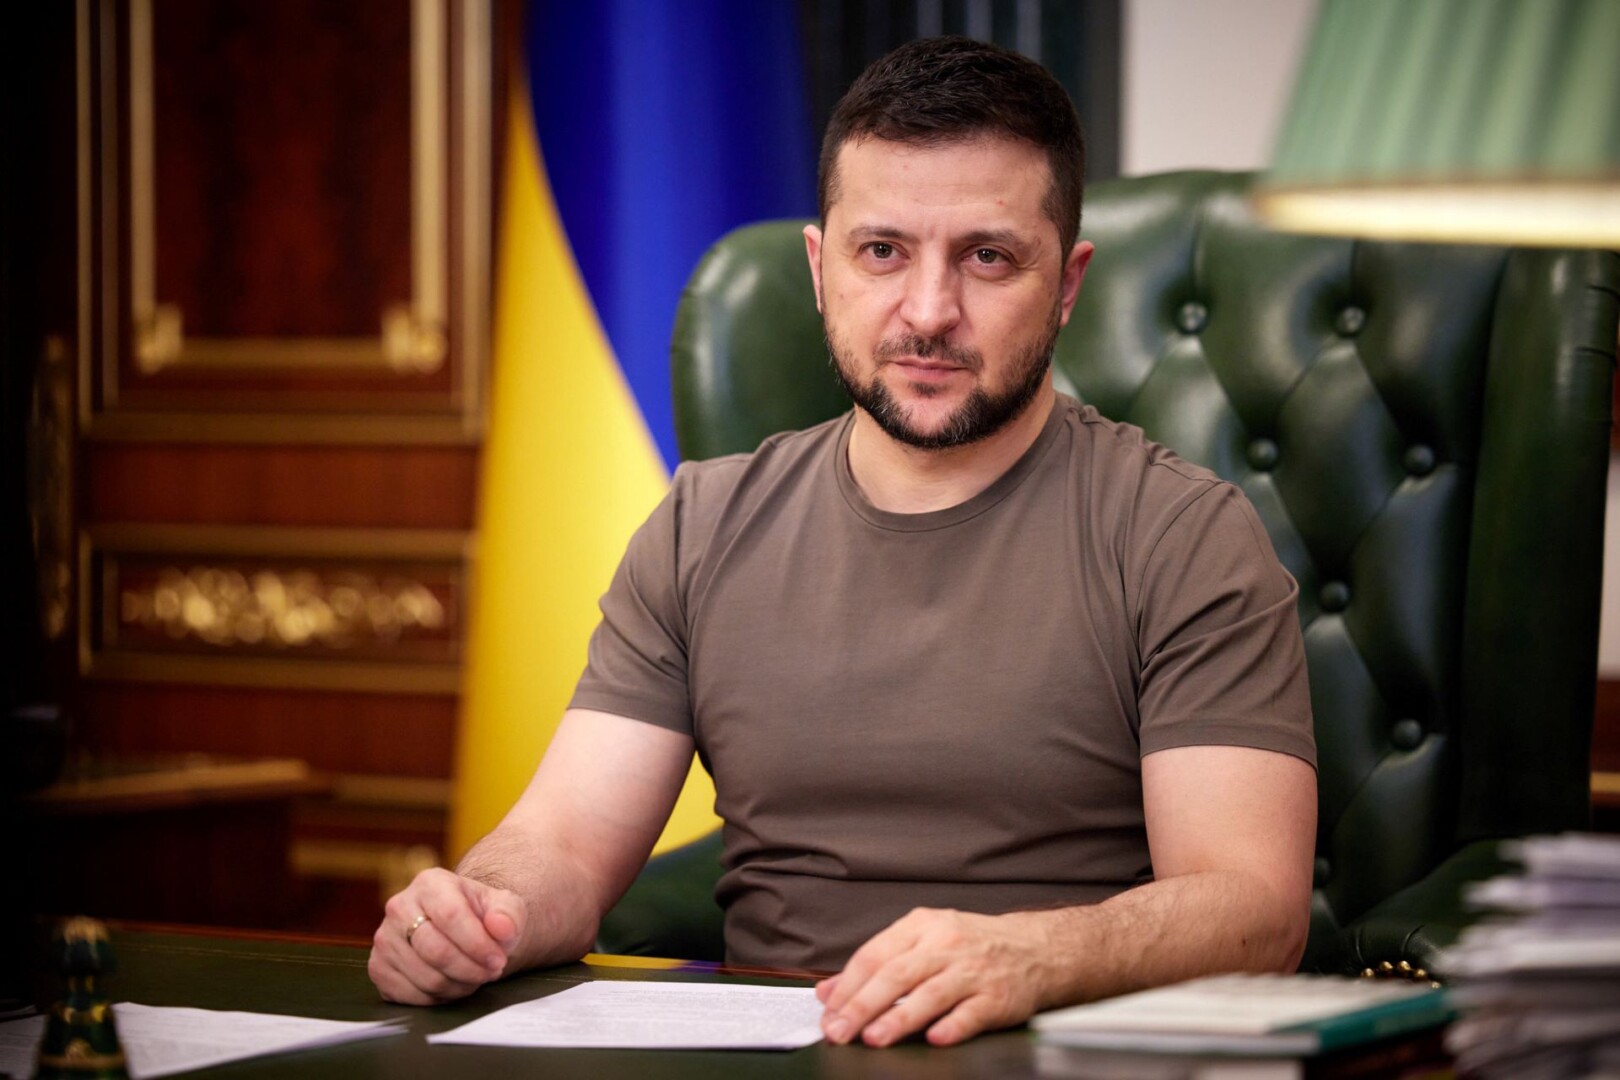 Wolodymyr Selenskyj / Archivbild / We are working to make the whole world friends of Ukraine - address by President Volodymyr Zelenskyy. by President Of Ukraine is marked with CC0 1.0.